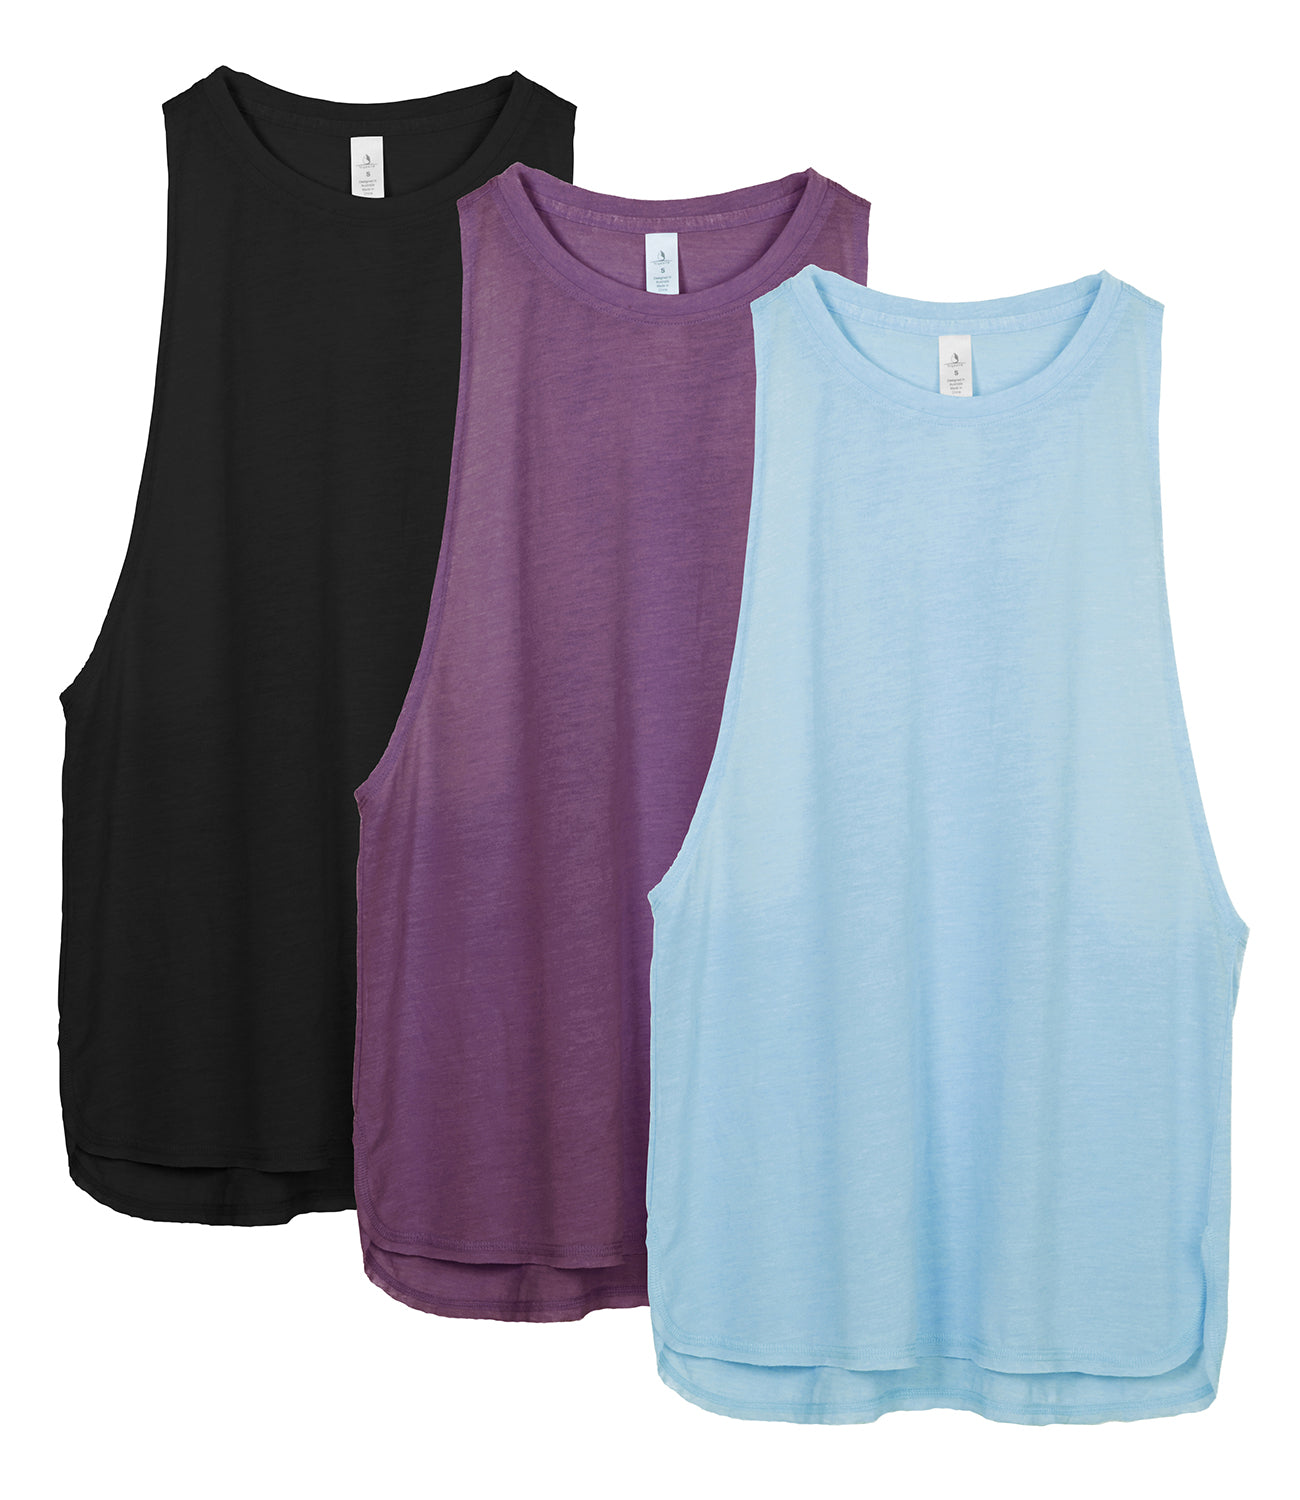 icyzone Workout Tank Tops for Women - Racerback Athletic Yoga Tops, Running  Exercise Gym Shirts(Pack of 3)(Black/Cream White/Brick, XS) at   Women's Clothing store